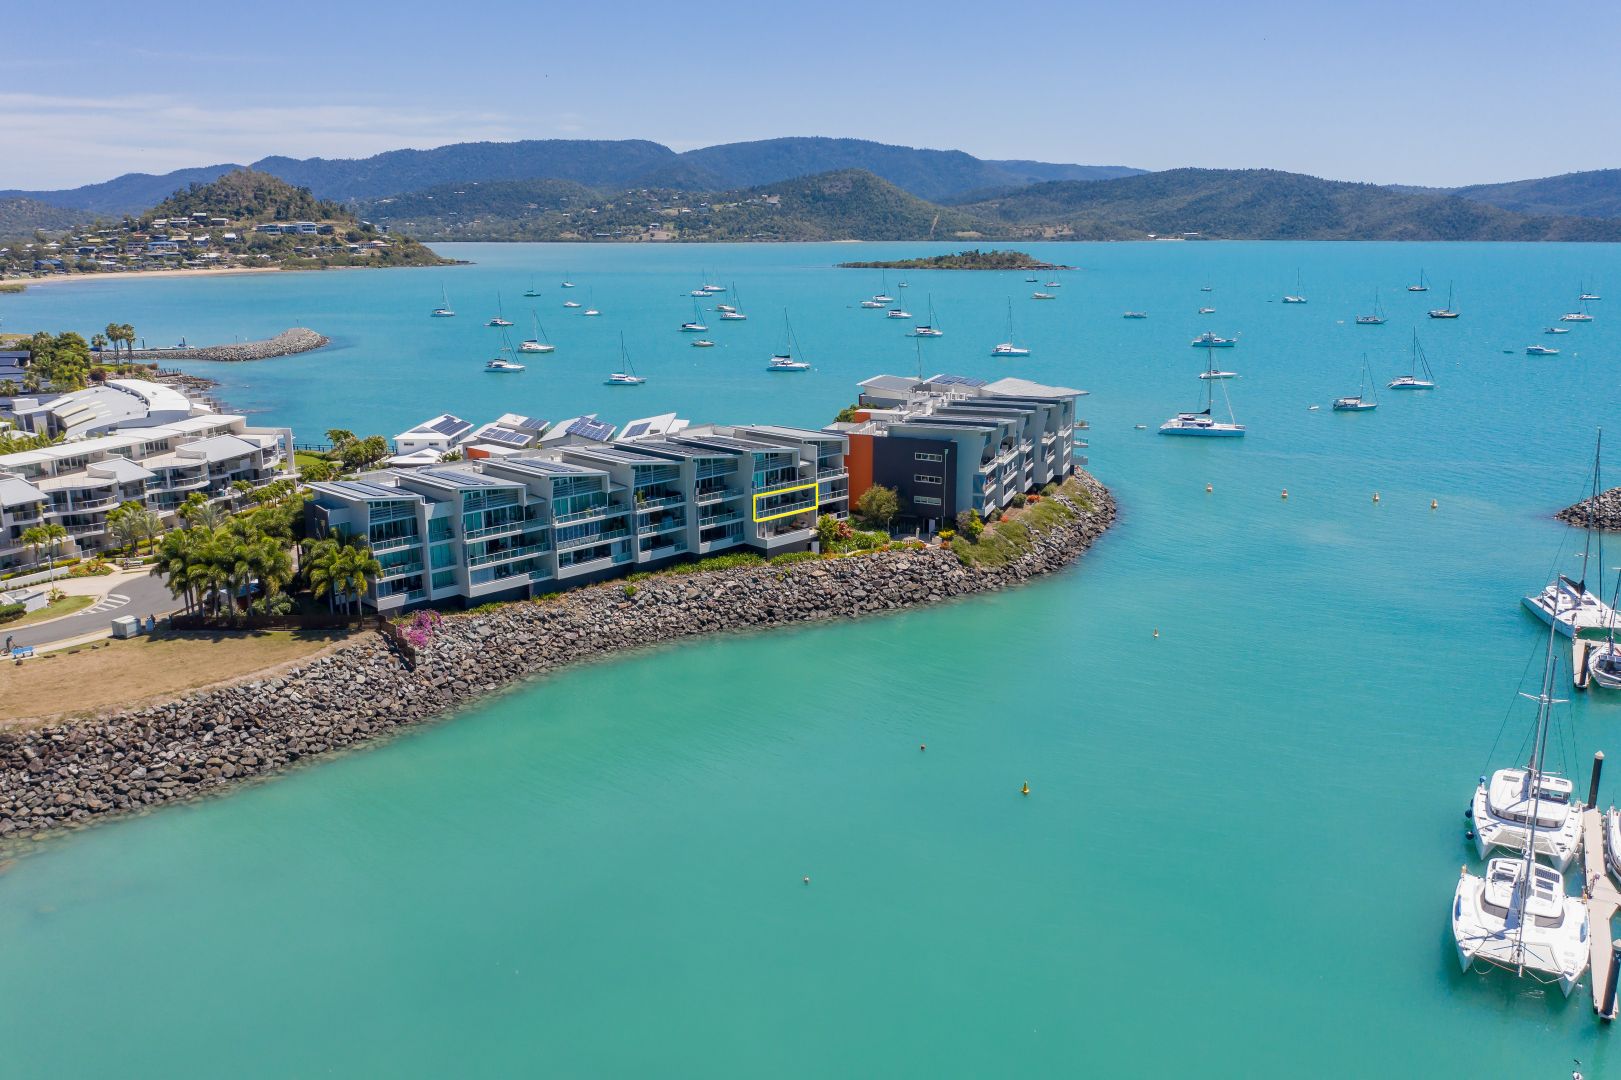 13/144 Shingley Drive, Airlie Beach QLD 4802, Image 1